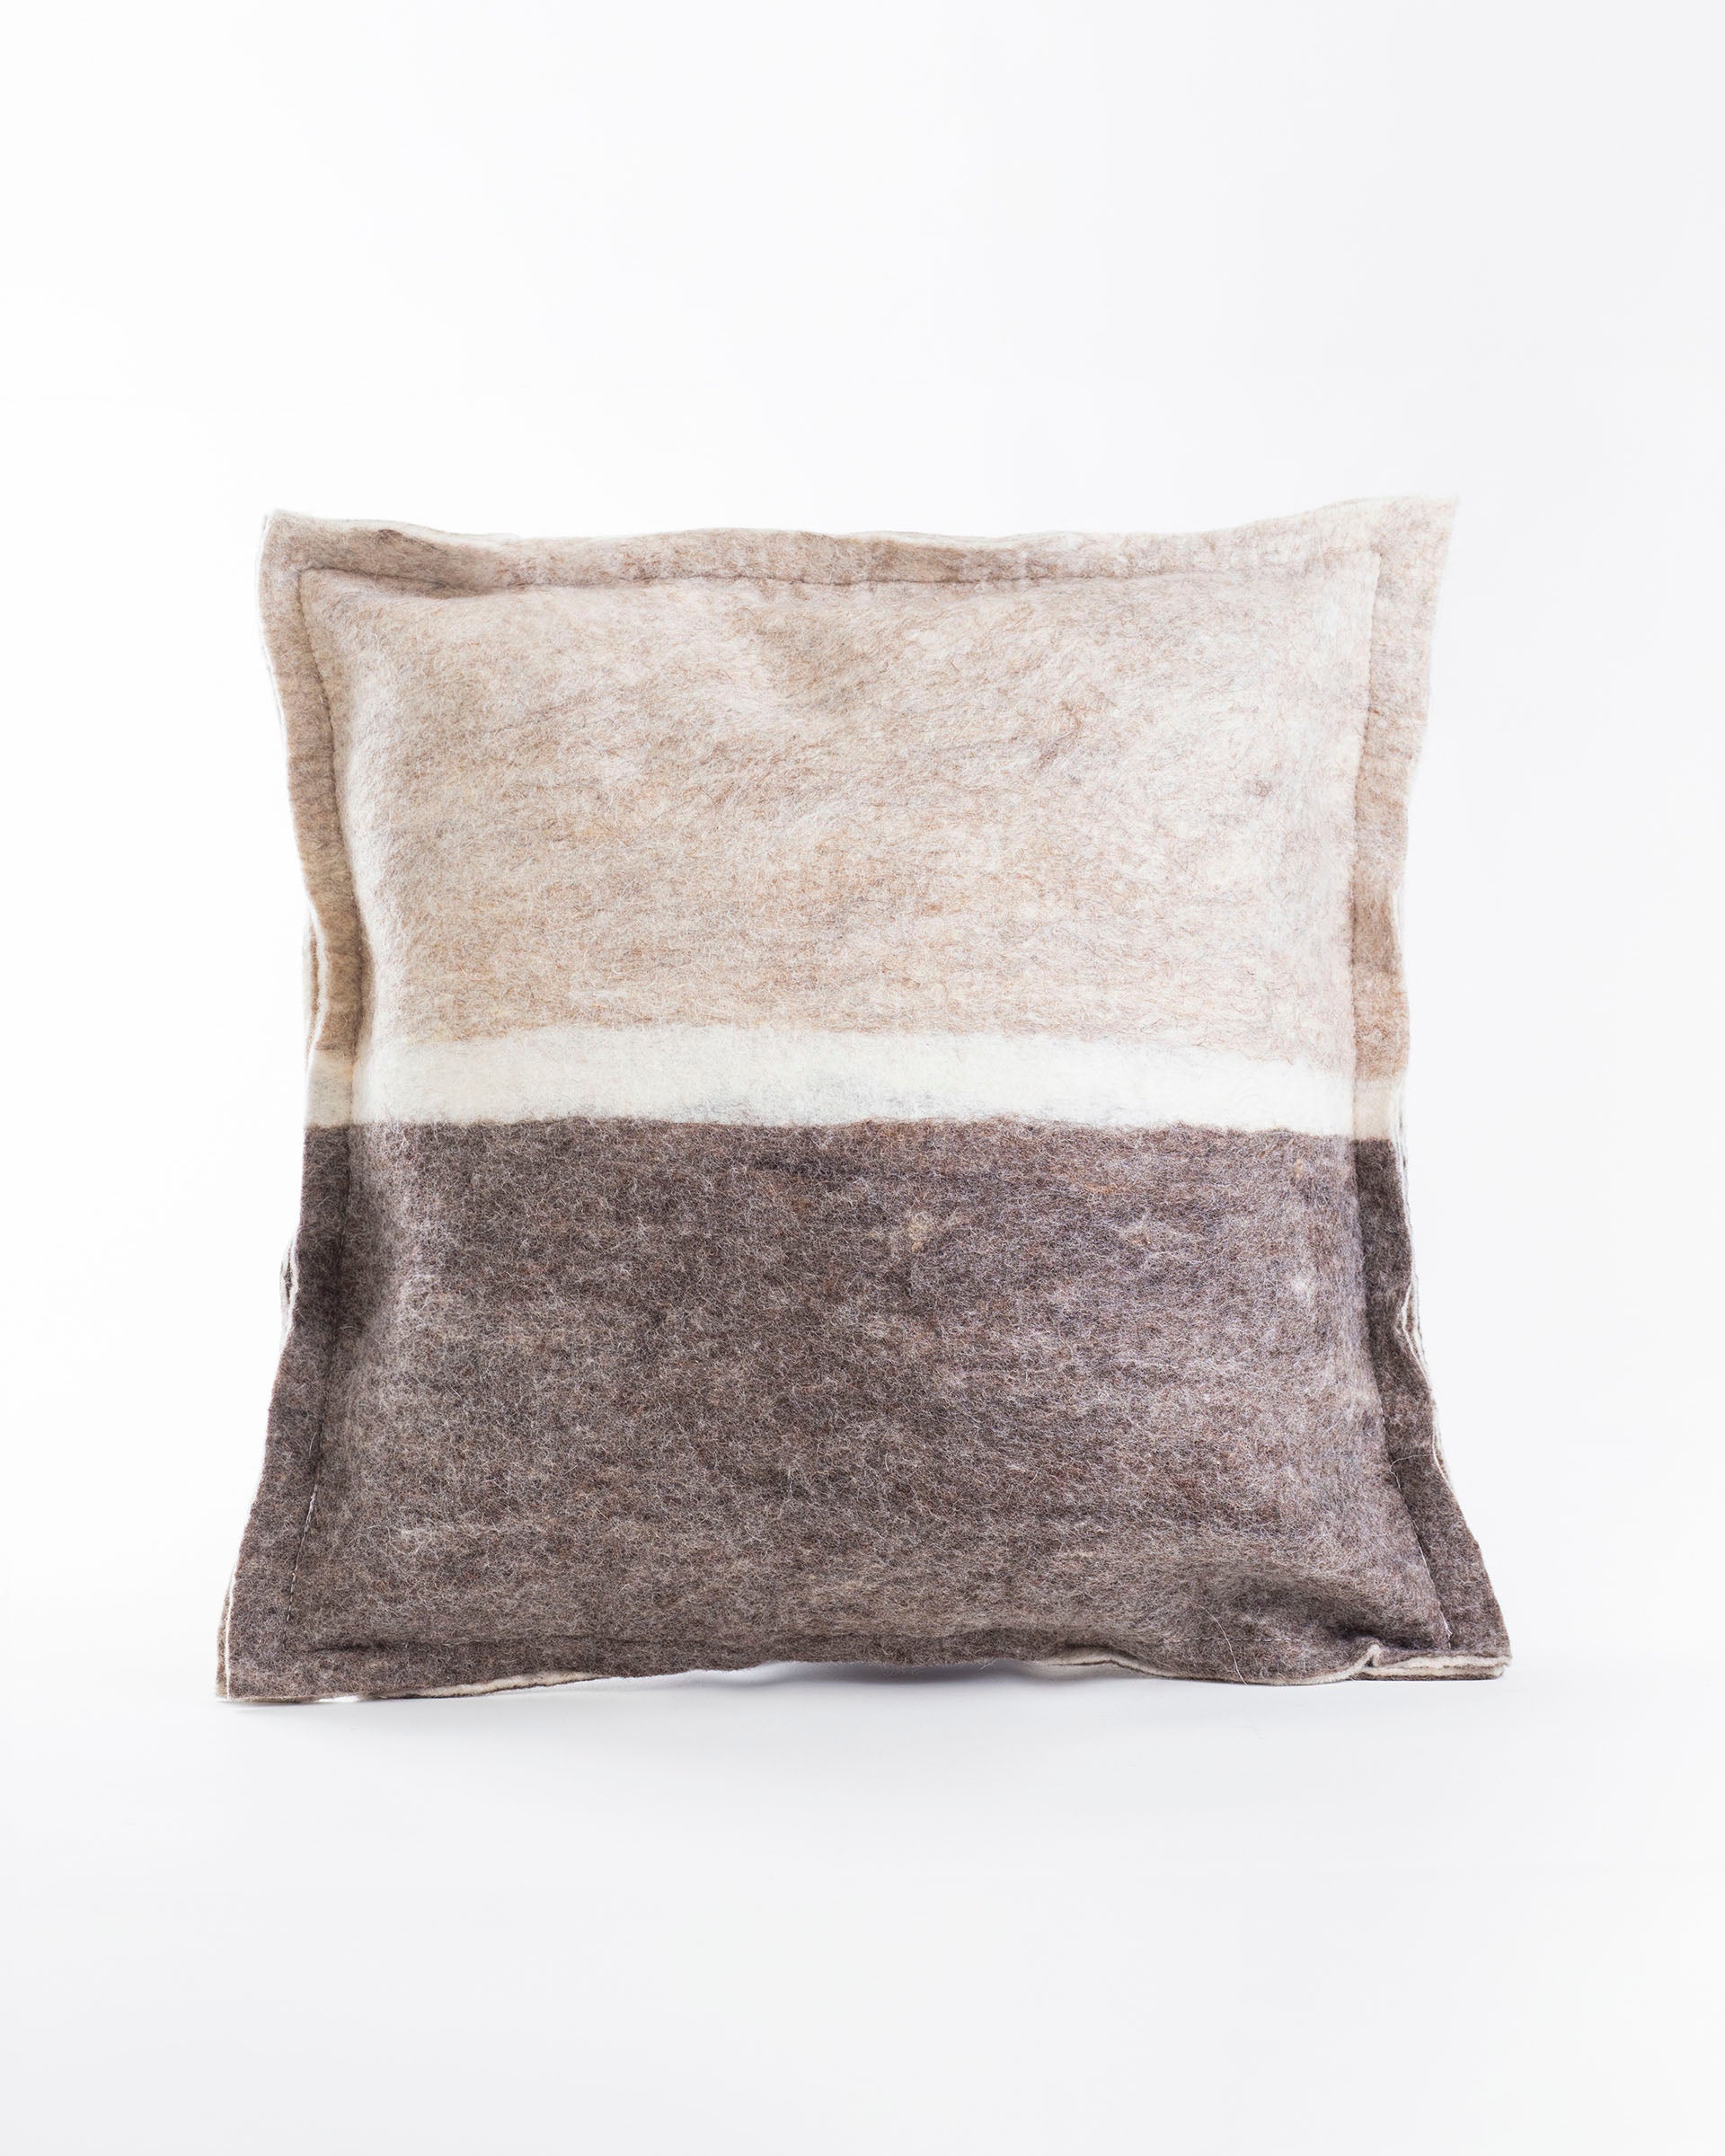 neutral and grey felt wool pillow with a white line across the middle sitting on a white background